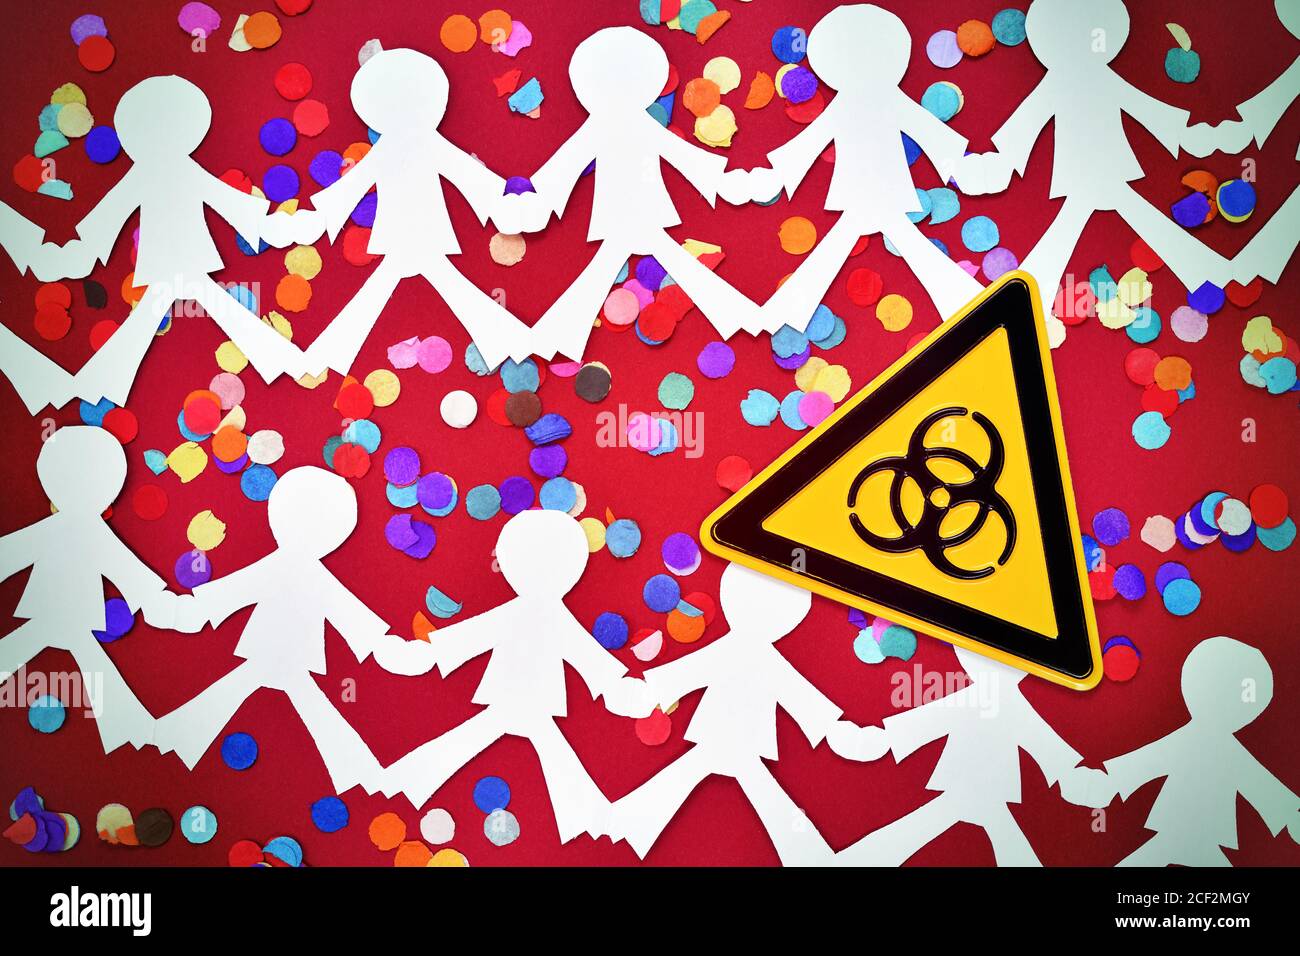 Chain of people, confetti and biohazard sign, corona infections at events Stock Photo